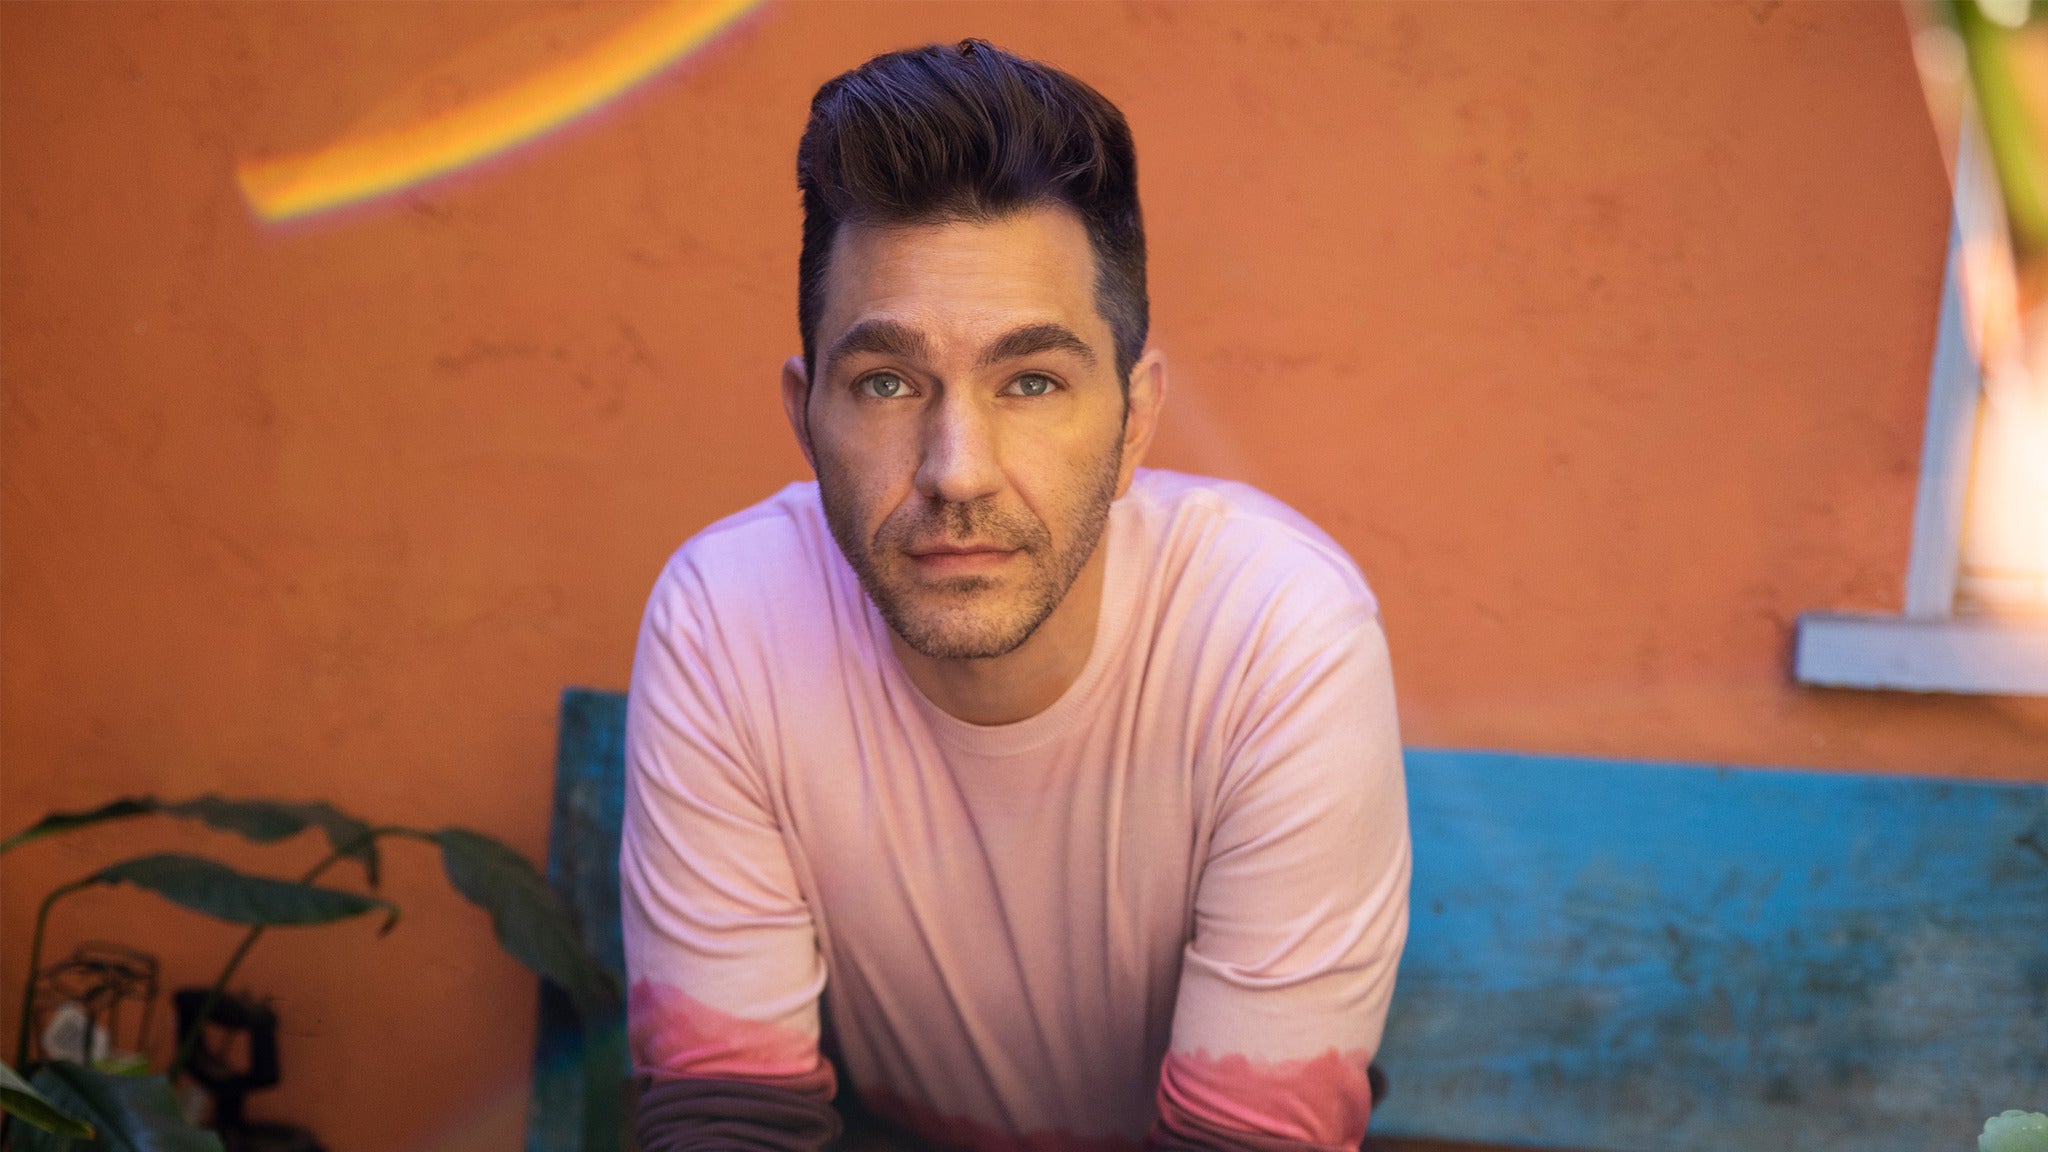 Andy Grammer - the Art of Joy Tour presale code for early tickets in Denver